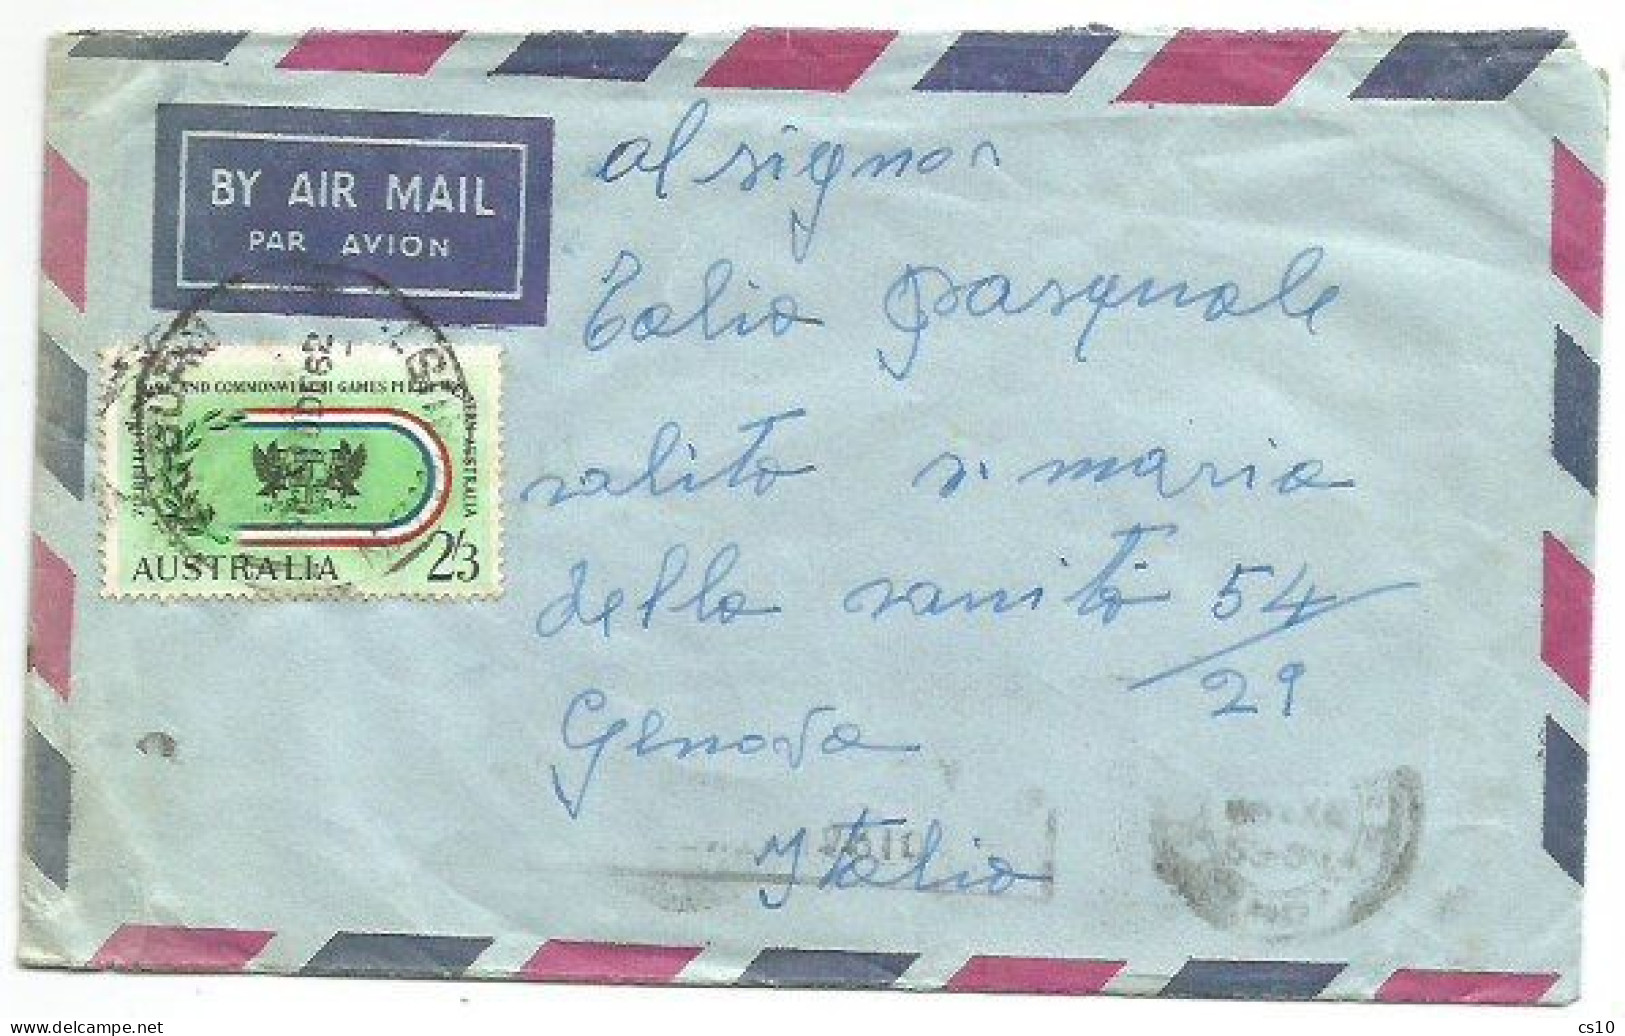 Australia Commonwealth Games 2S3 Solo Franking Airmail Cover Sidney 10dec1962 X Italy - Lettres & Documents